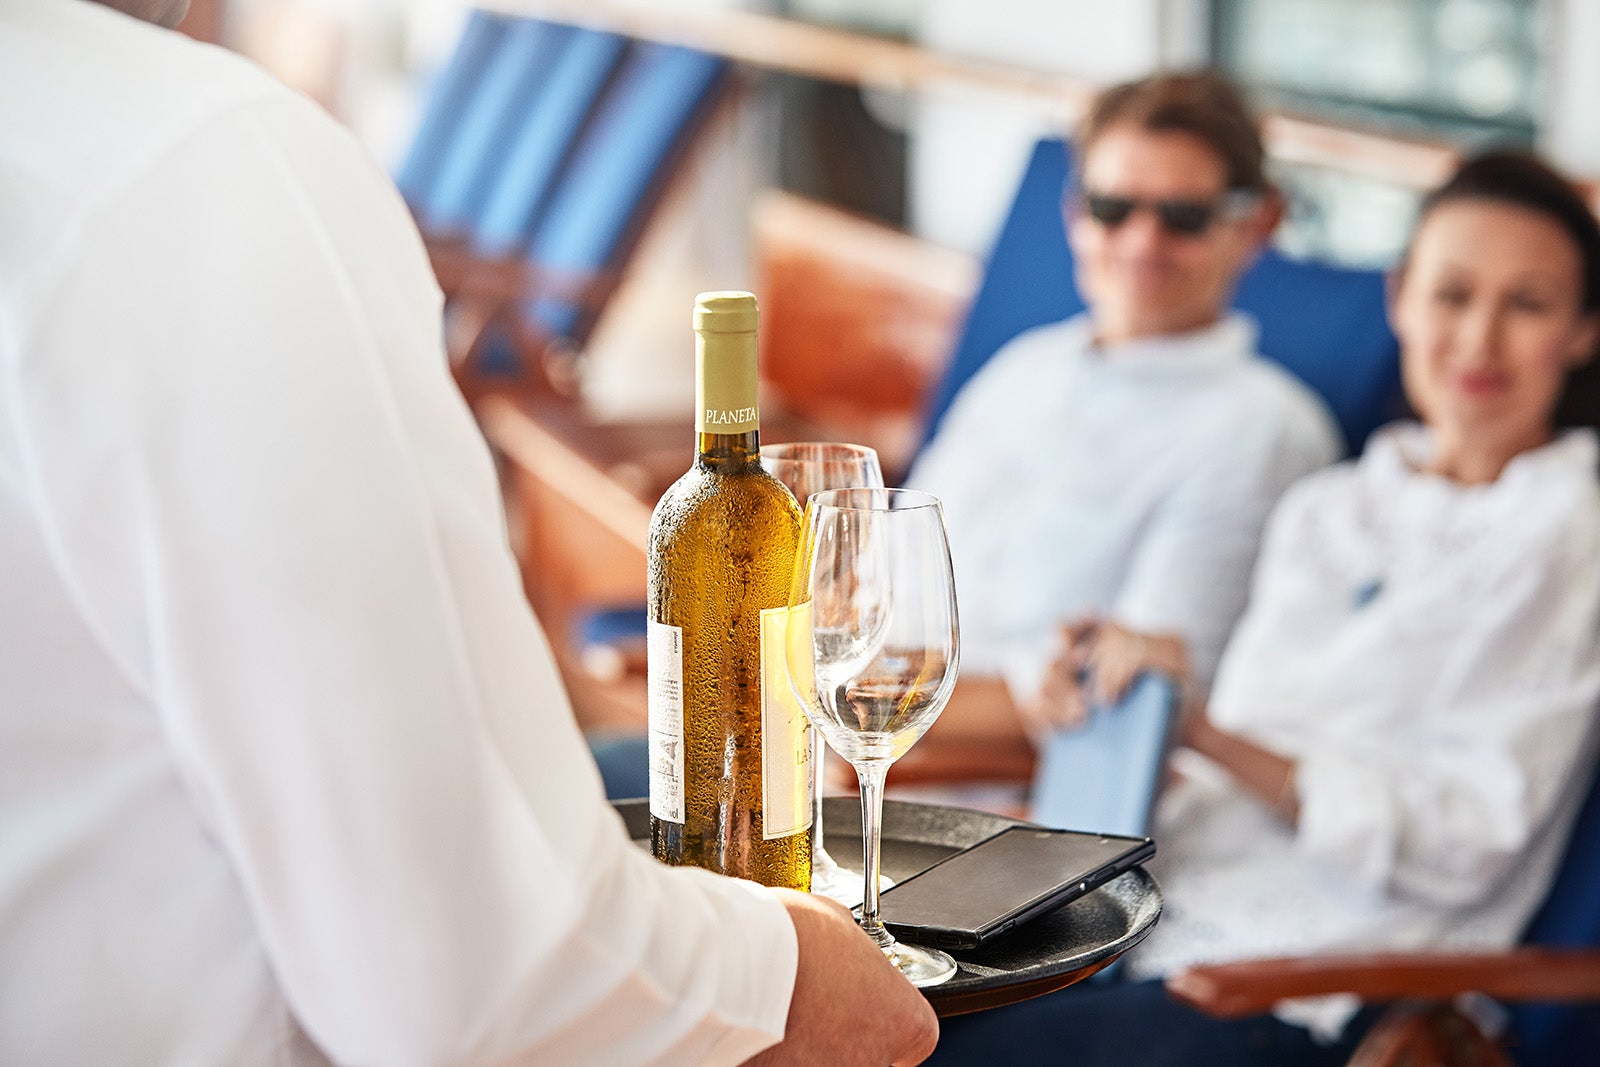 A crew member is bringing a bottle of white wine to the couple on the cruise ship deck